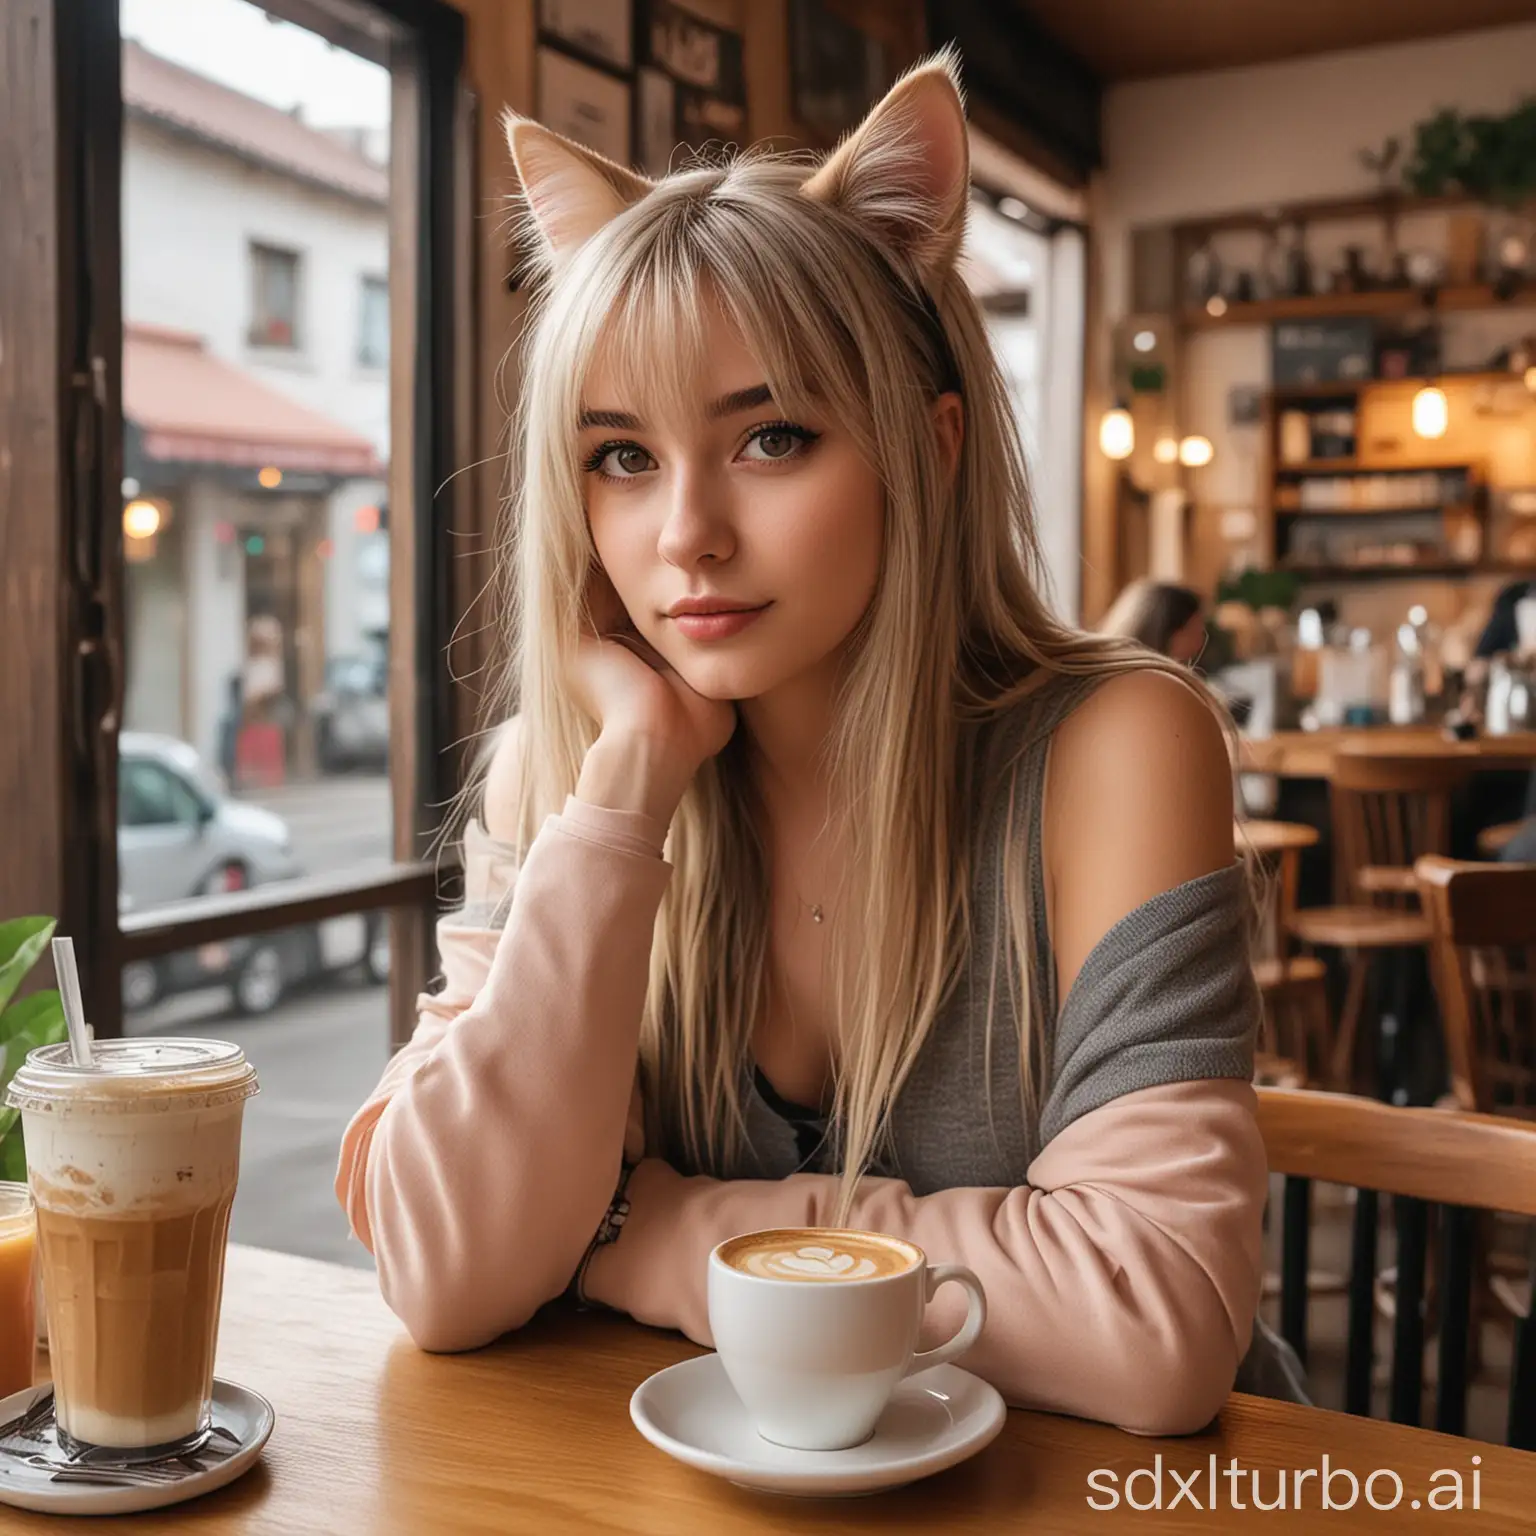 FelineInspired-Ambiance-Cat-Girl-Enjoying-a-Cozy-Caf-Moment